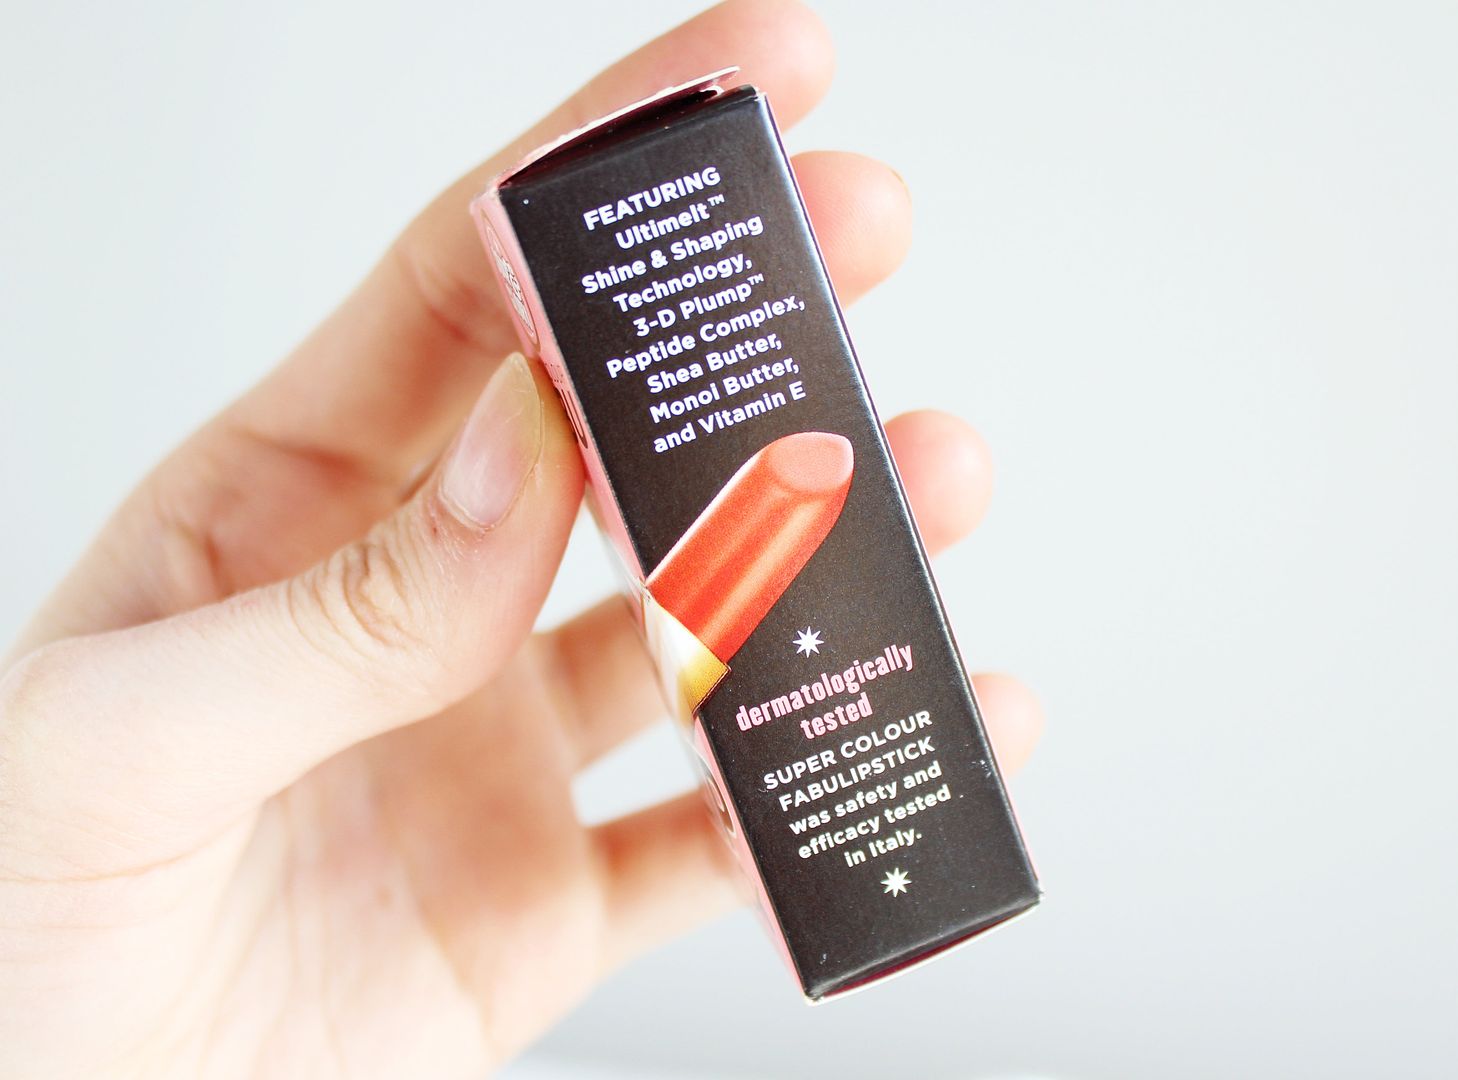 Every-Day-Red-Lip-Soap-And-Glory-Super-Colour-Fabu-Lipstick-Perfect-Day-Review-Box-Packaging-Belle-Amie-UK-Beauty-Fashion-Lifestyle-Blog